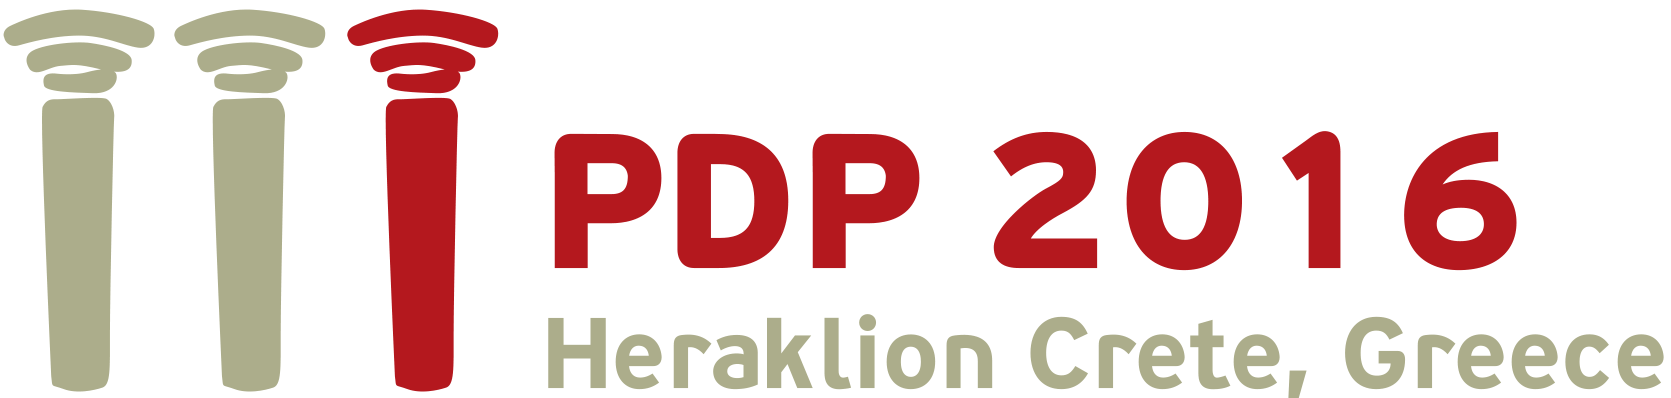 PDP2016 21st International Conference on Parallel, Distributed and Network-Based Processing